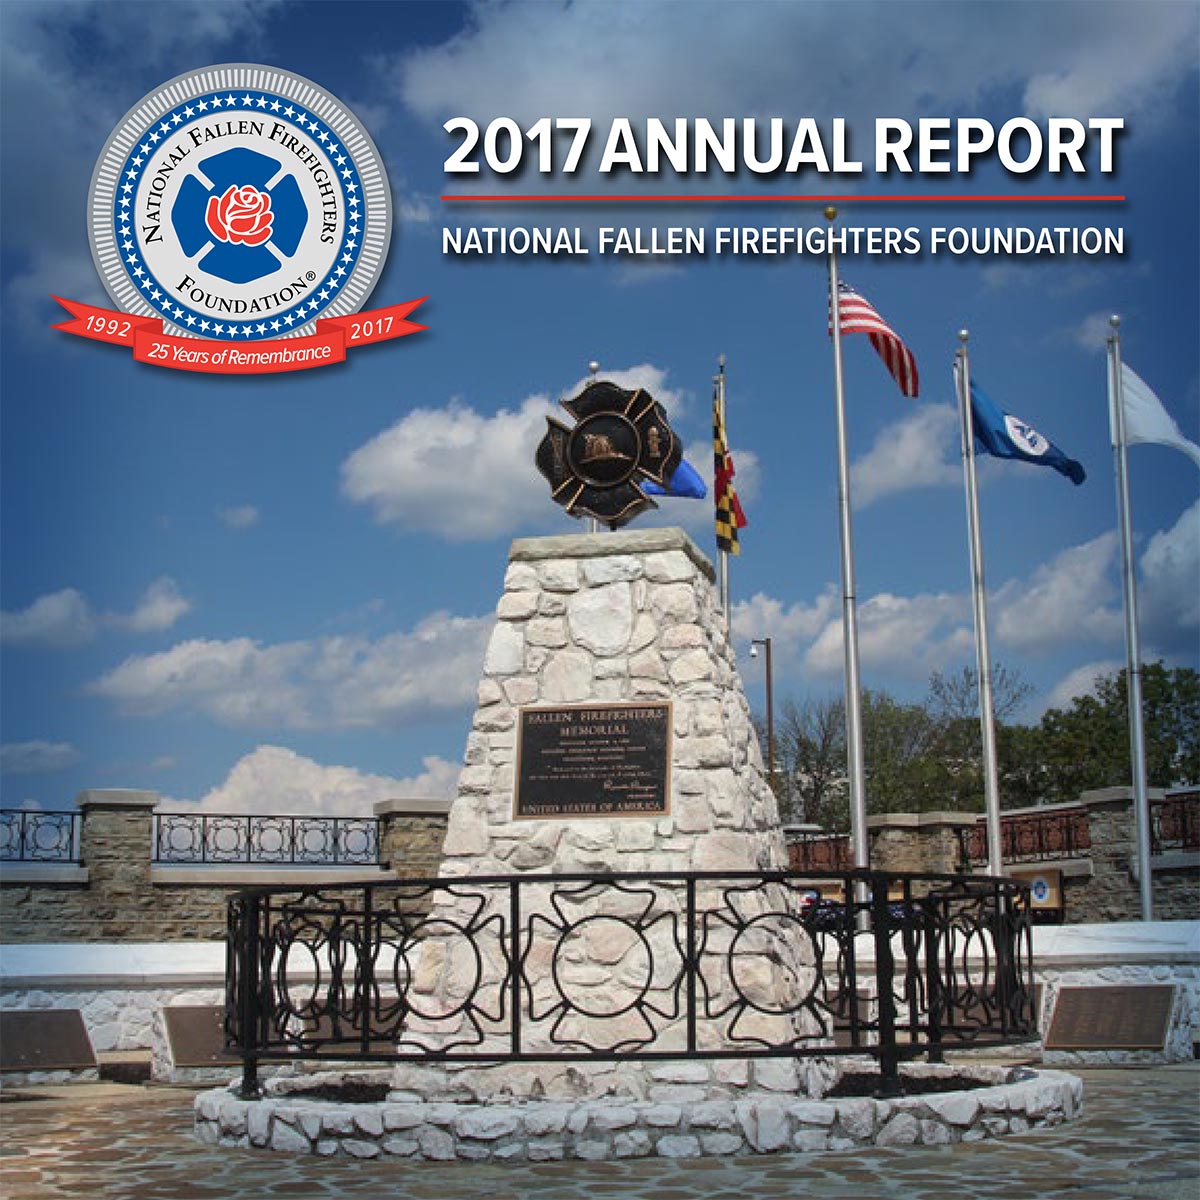  2017 National Fallen Firefighters Foundation Annual Report